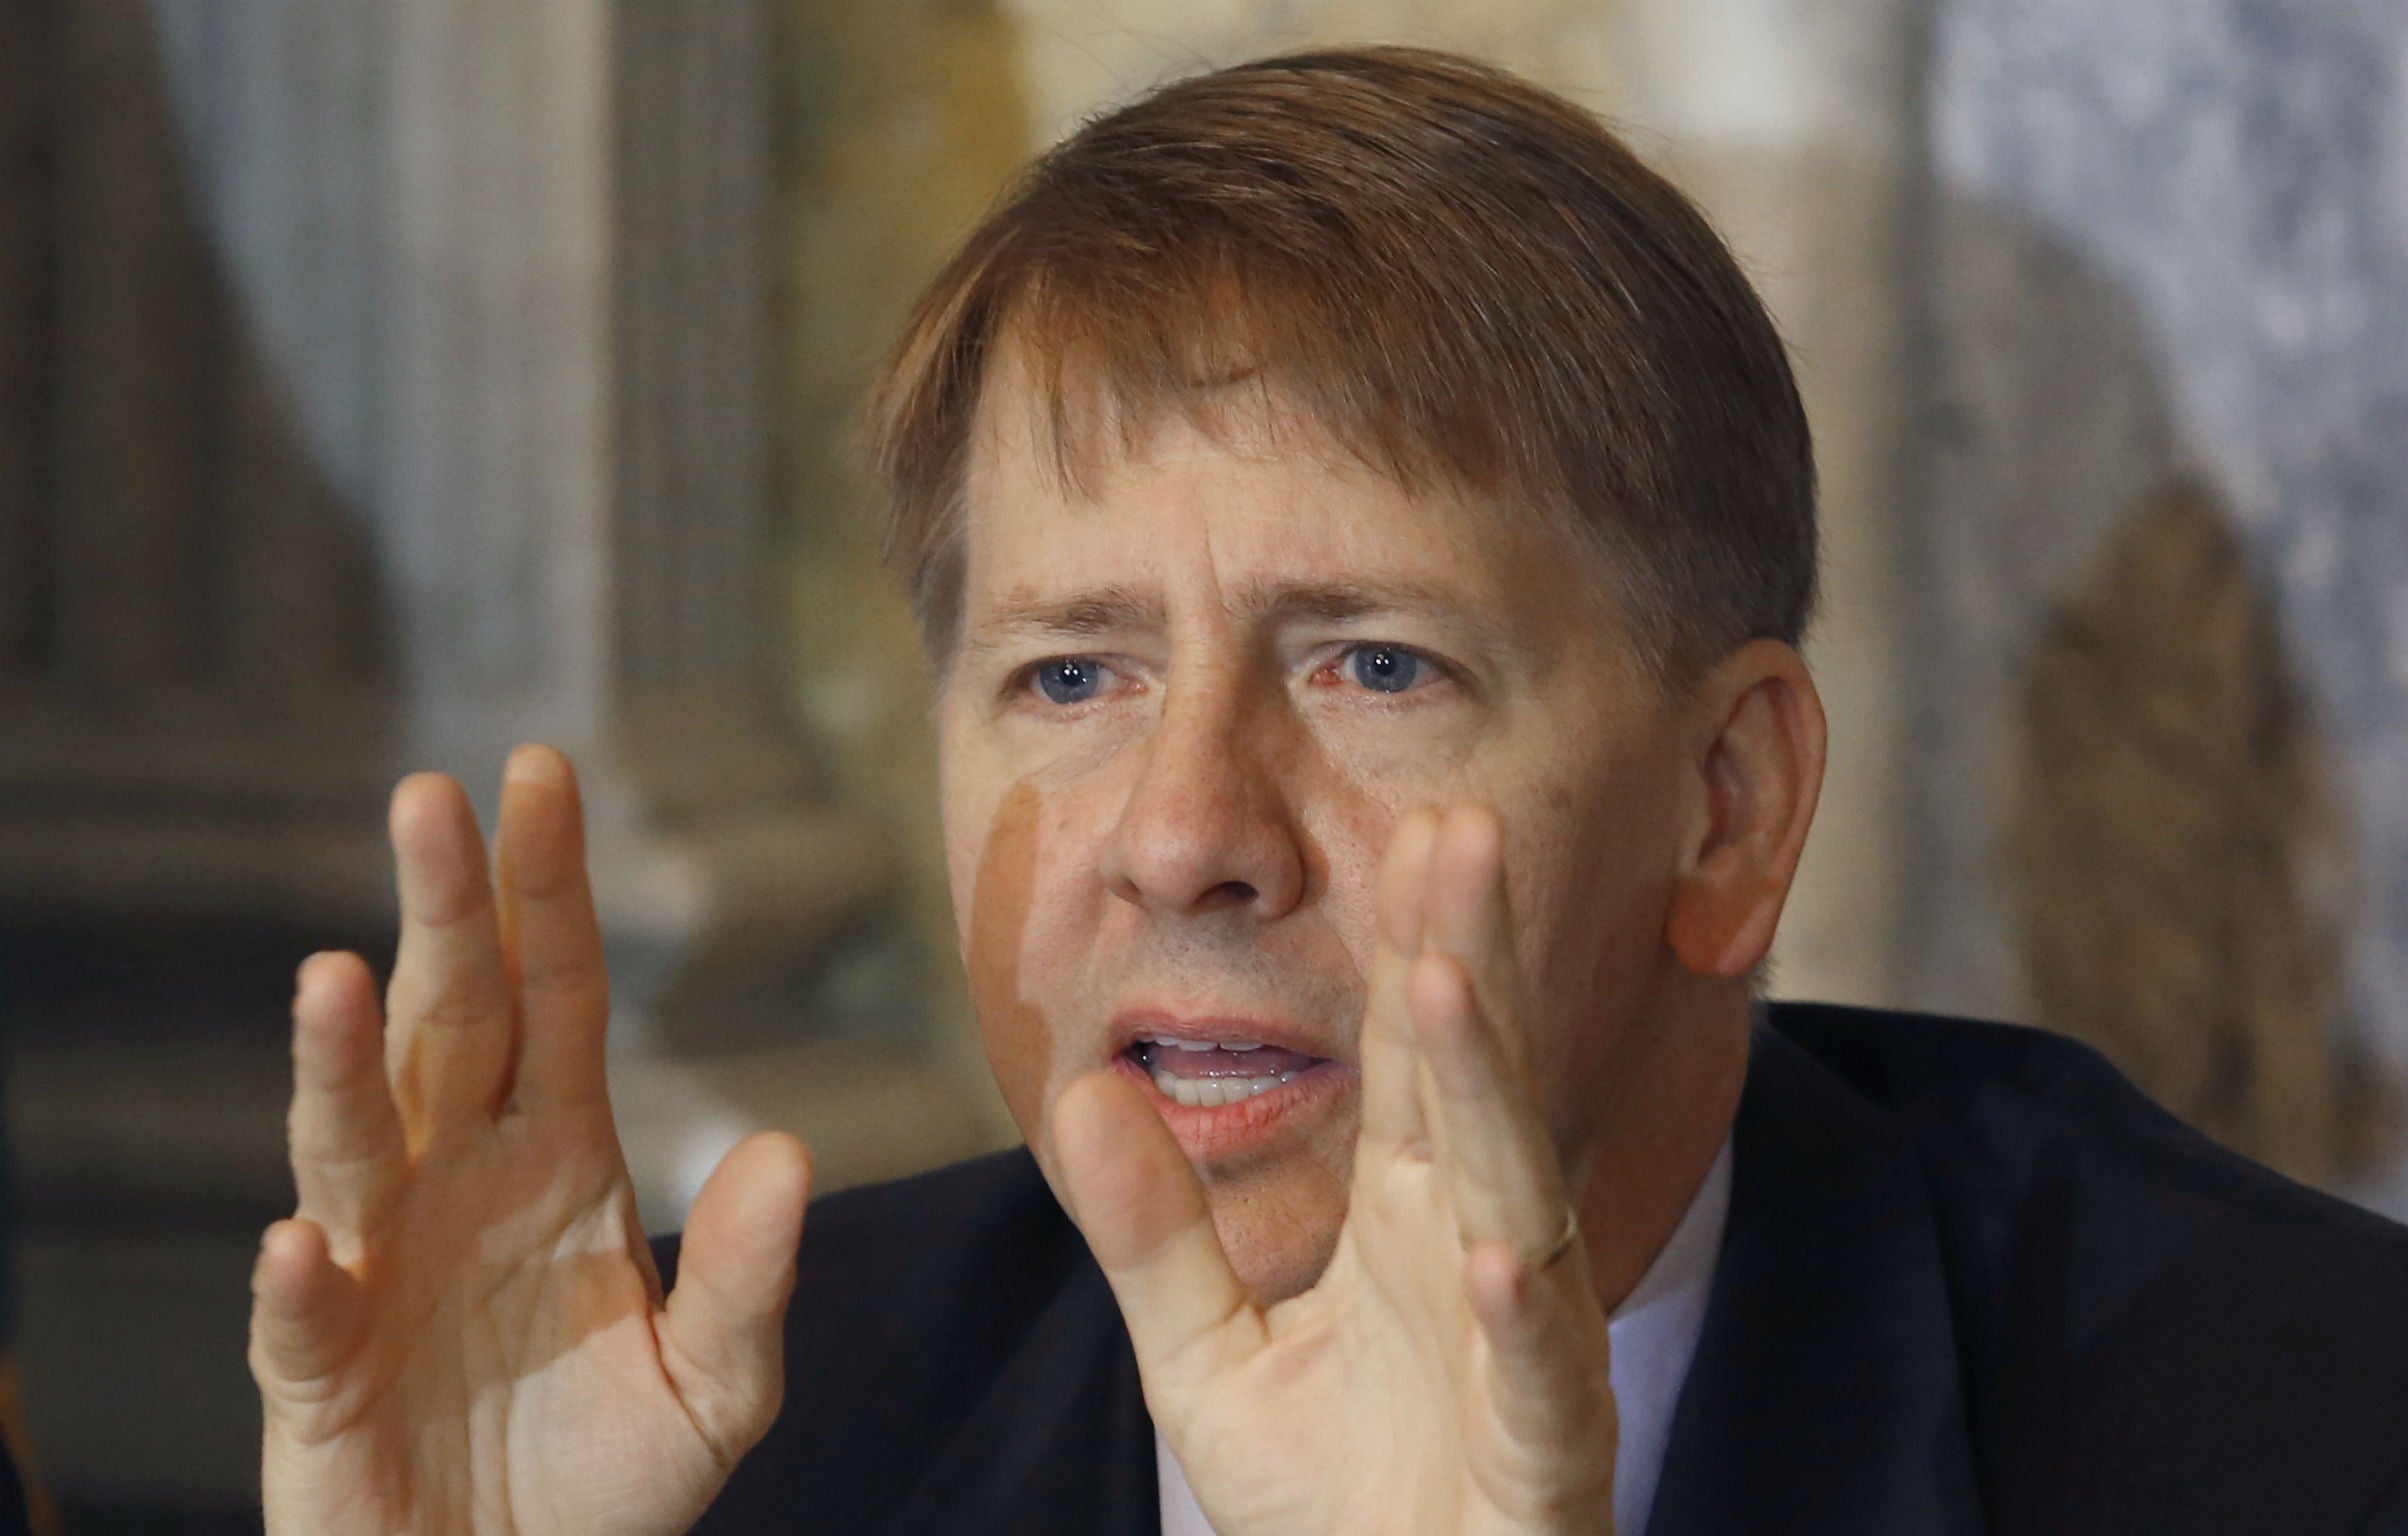 Consumer Financial Protection Bureau director Richard Cordray, seen here at the Treasury Department in Washington on October 2, 2014, urged Donald Trump to not let Americans 'get cheated out of their hard-earned money'